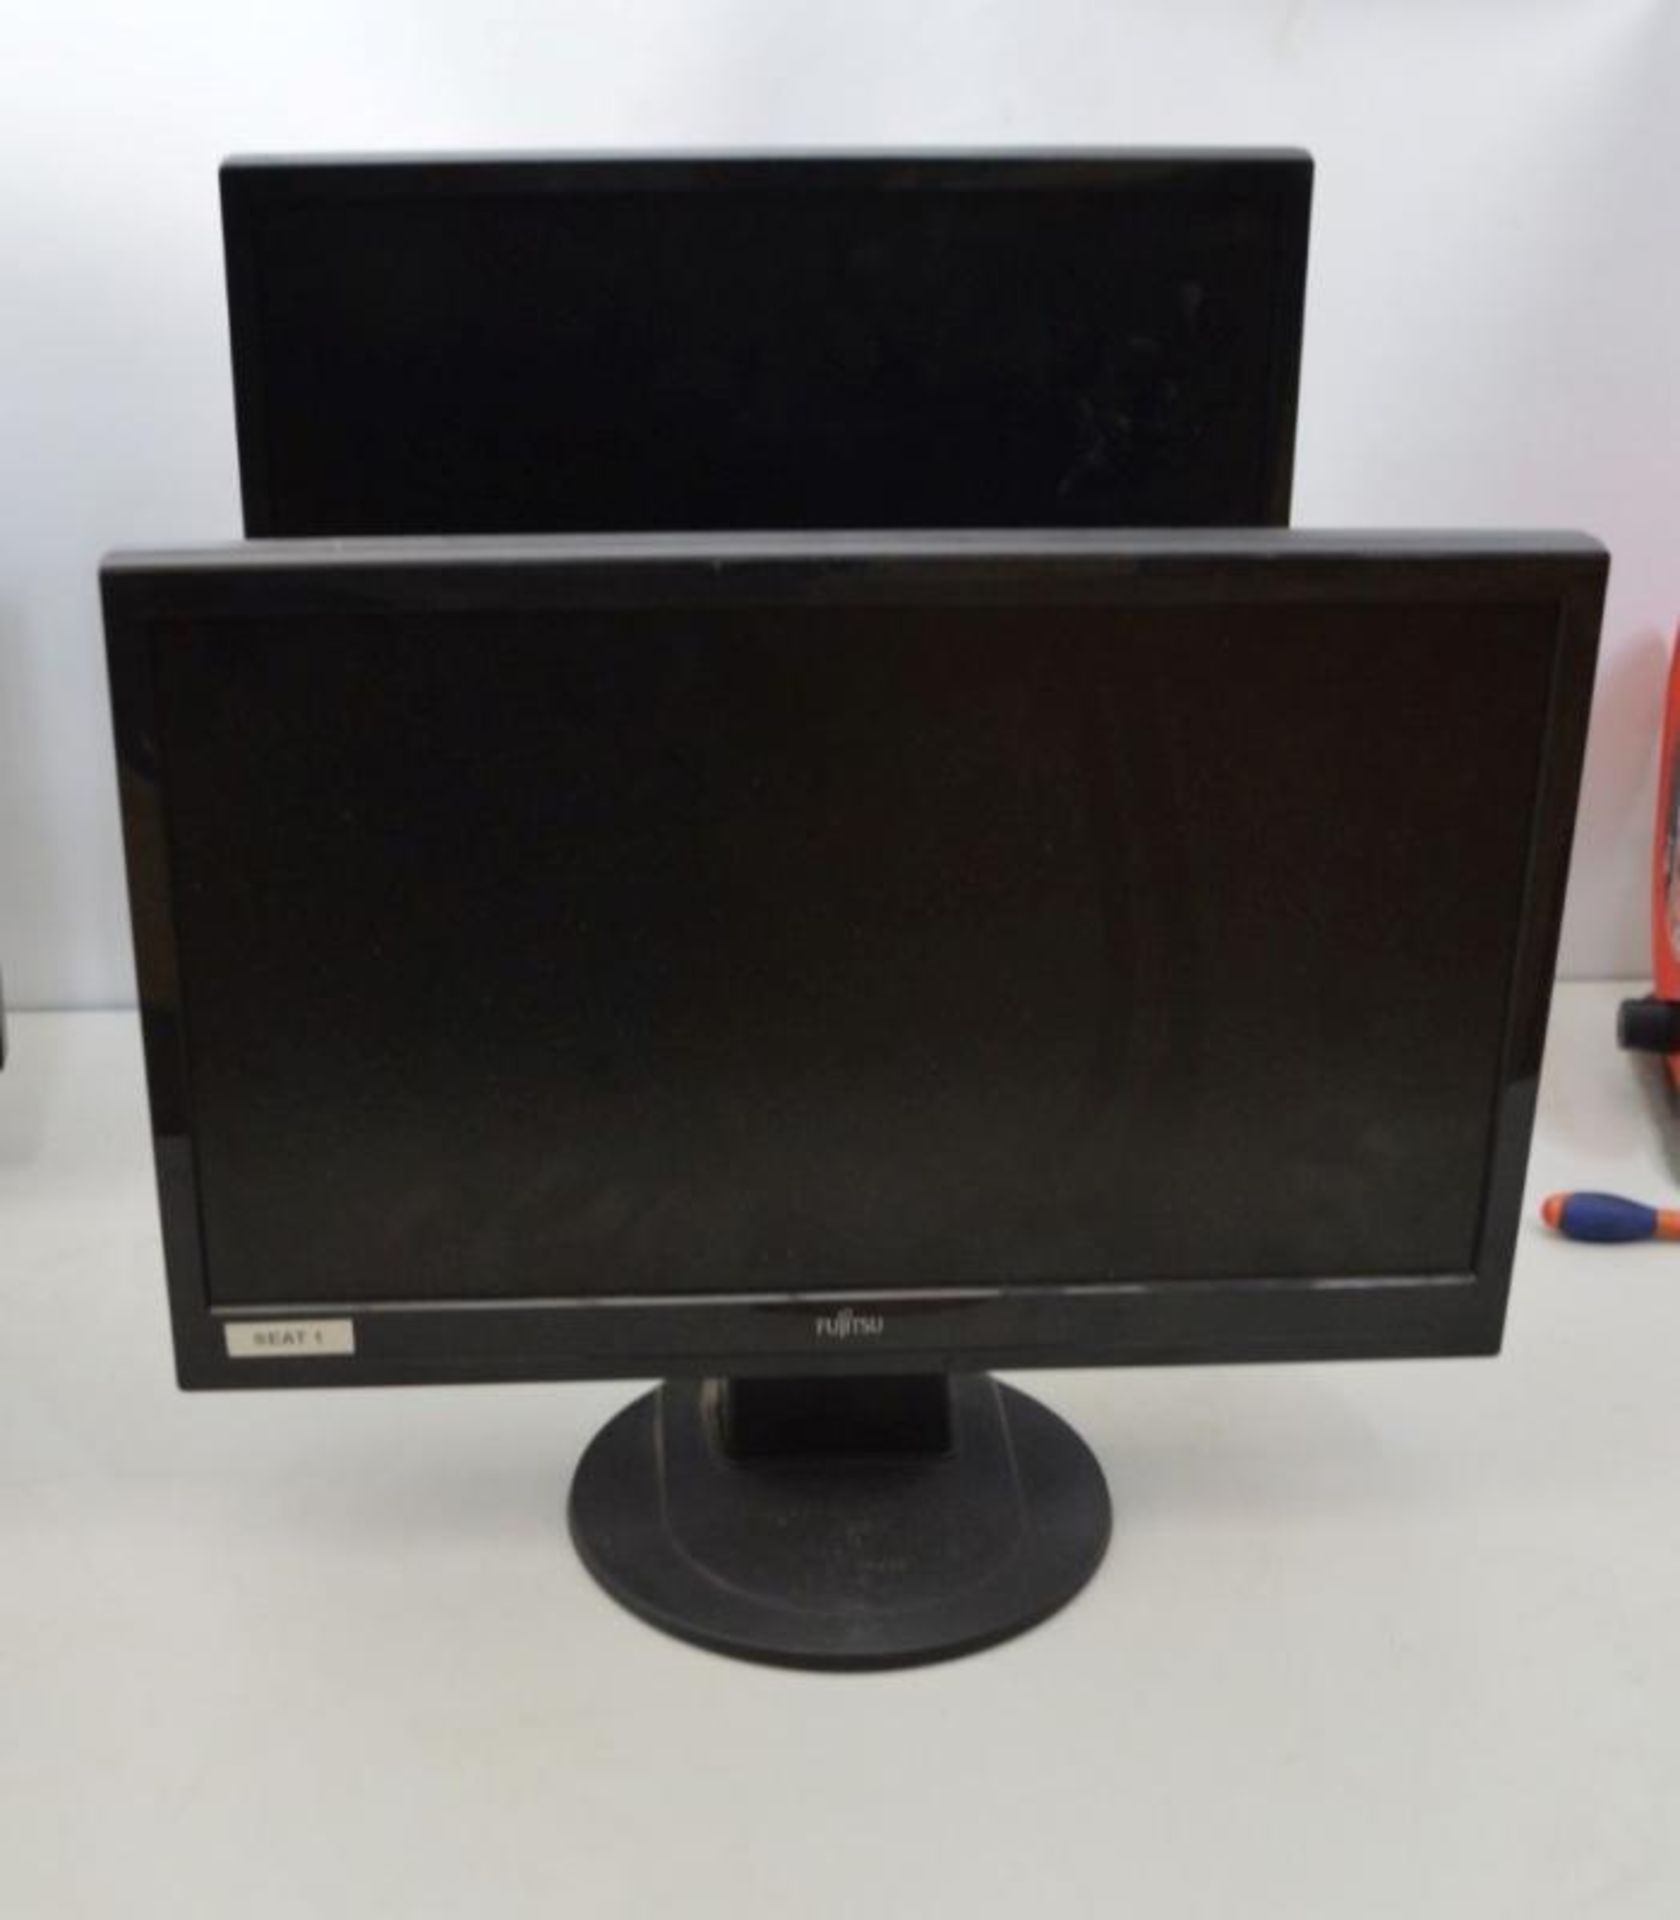 4 x Various Computer PC Monitors - Not Working / Unknown Faults - Ref H356 - CL394 - Location: Altri - Image 3 of 4